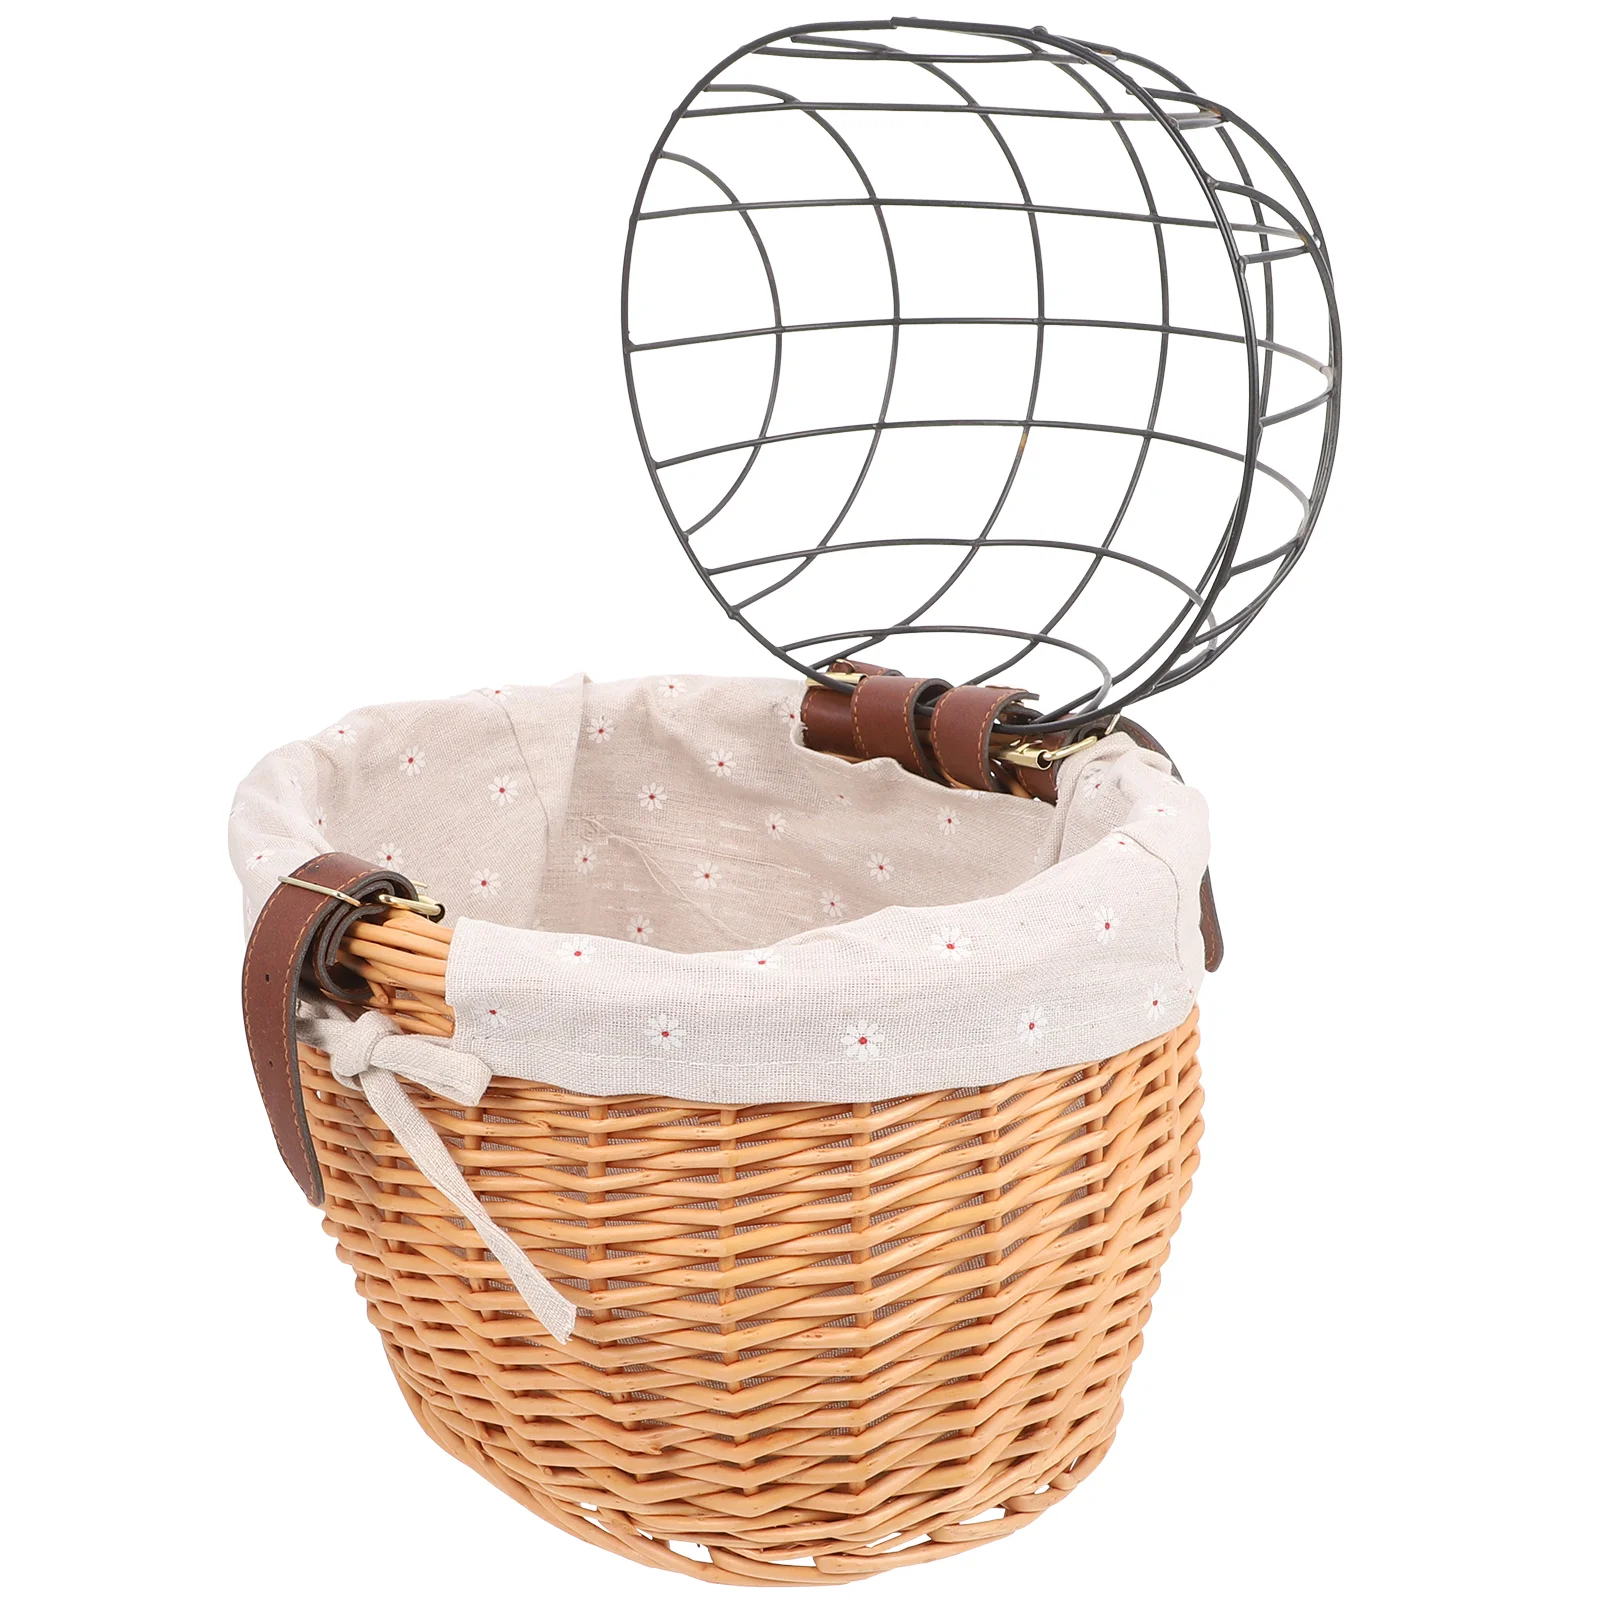 

Baskets Bike Carrier with Lining and Removable Metal Cover Front Carrier Bag Handlebar Basket for Cat